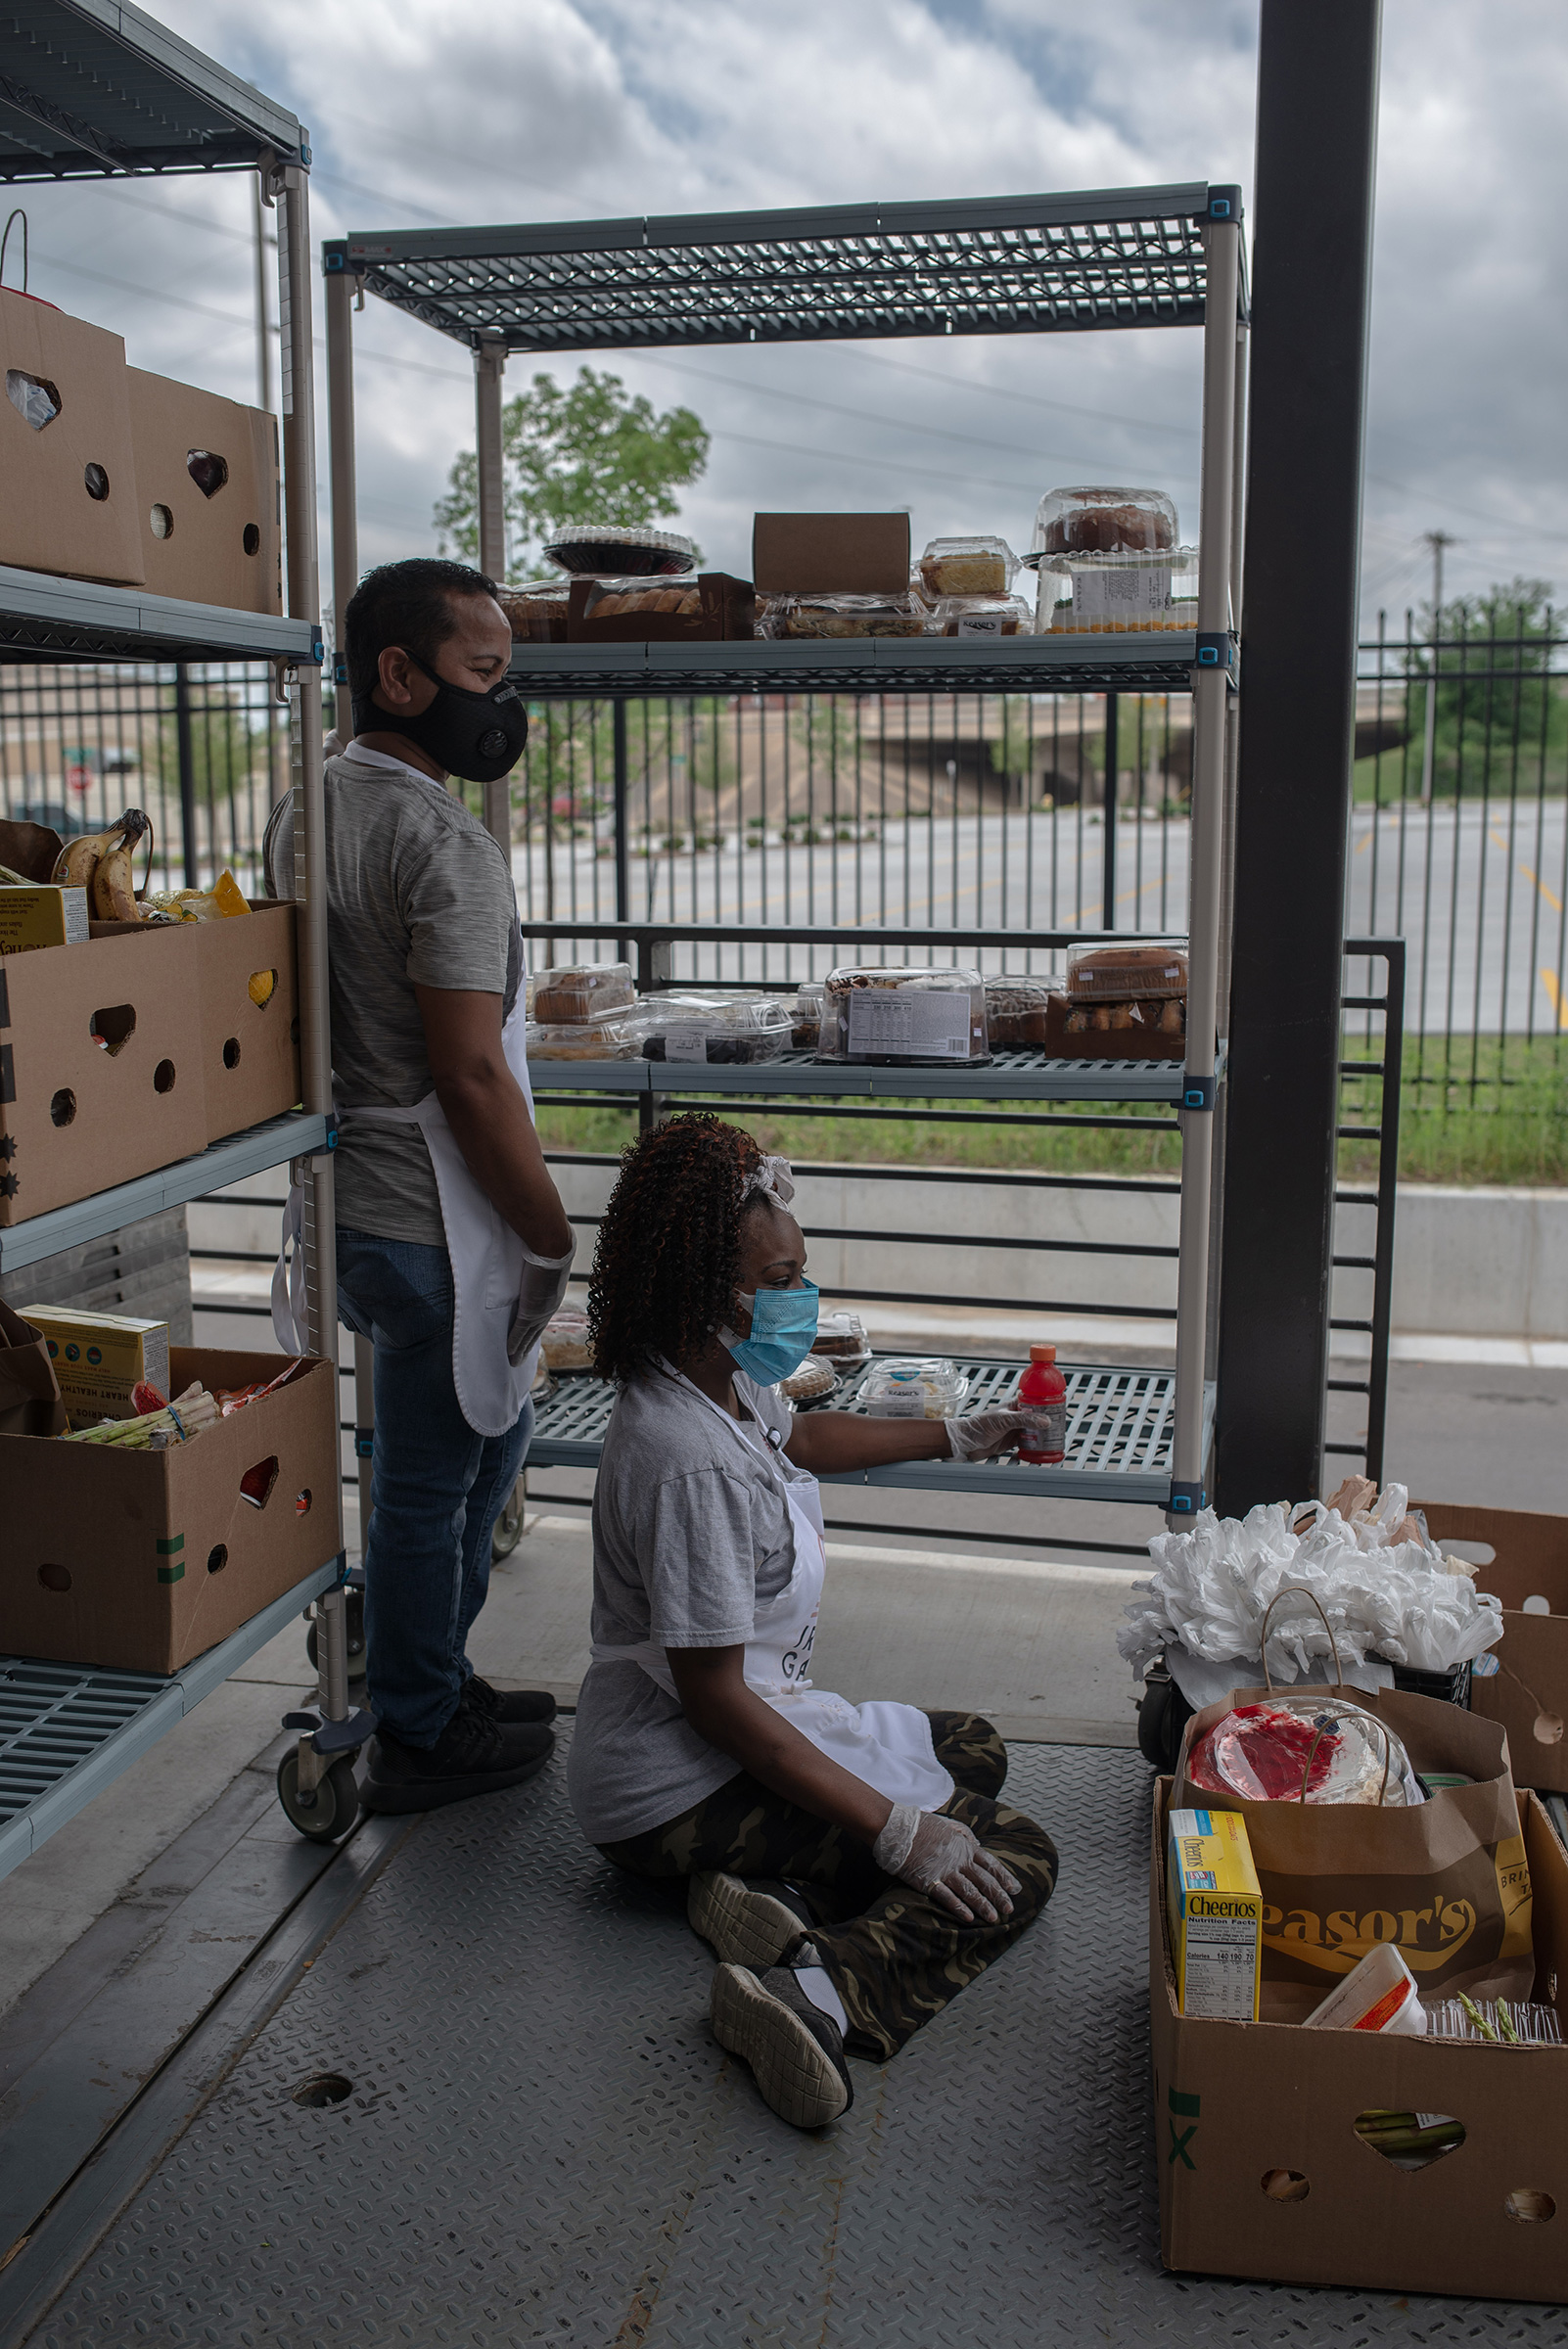 Workers at the Iron Gate drive-through food pantry in Tulsa on April 7. (September Dawn Bottoms for TIME)